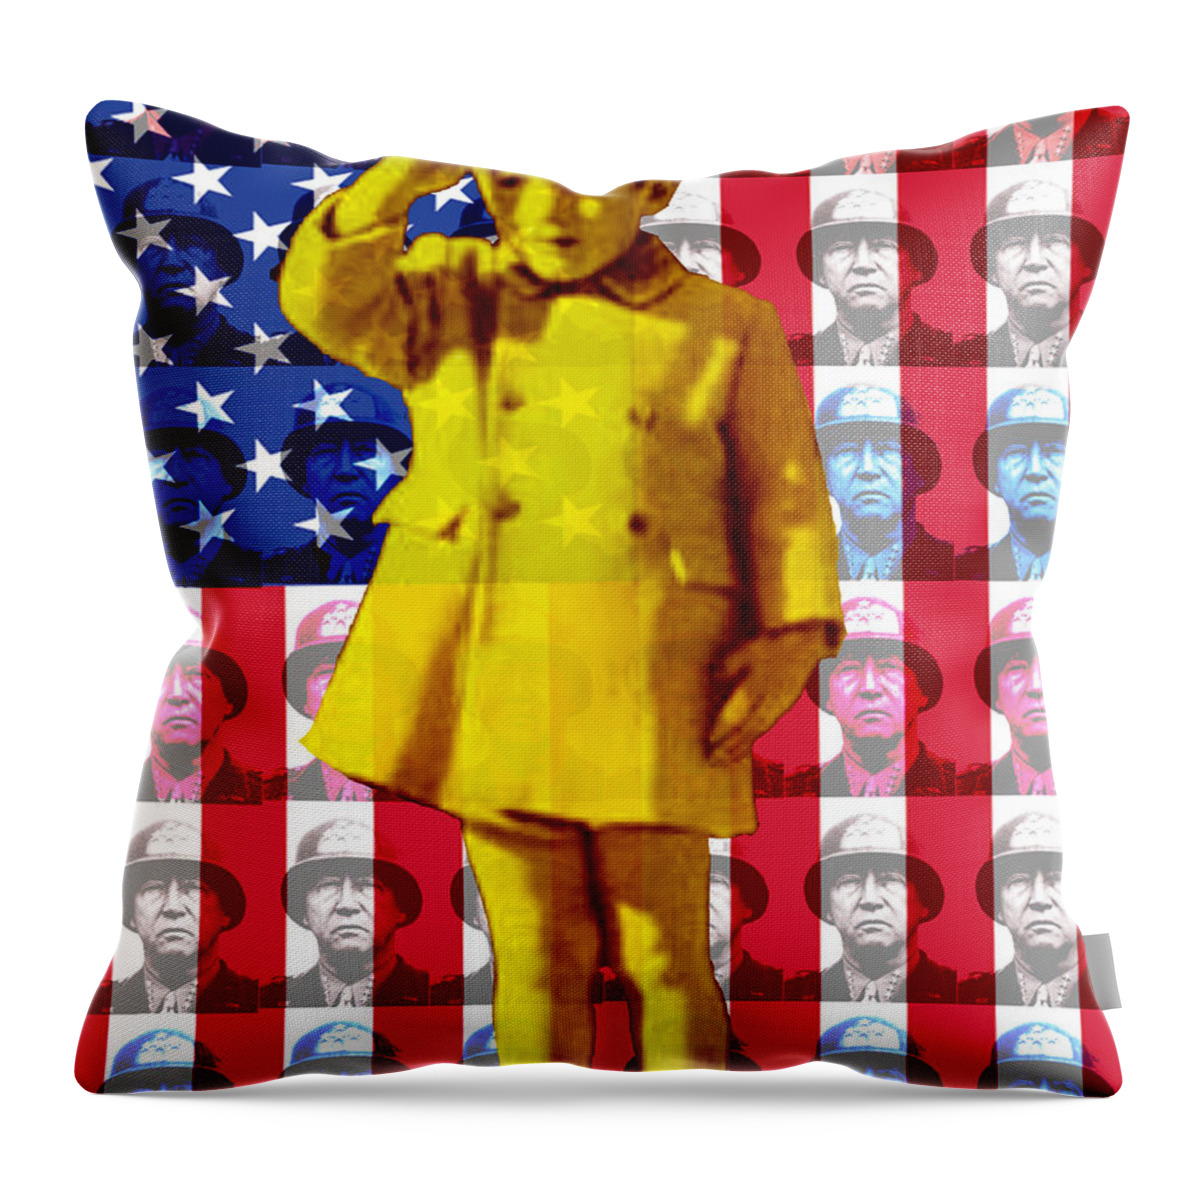 Salute Throw Pillow featuring the digital art Salute by Seth Weaver